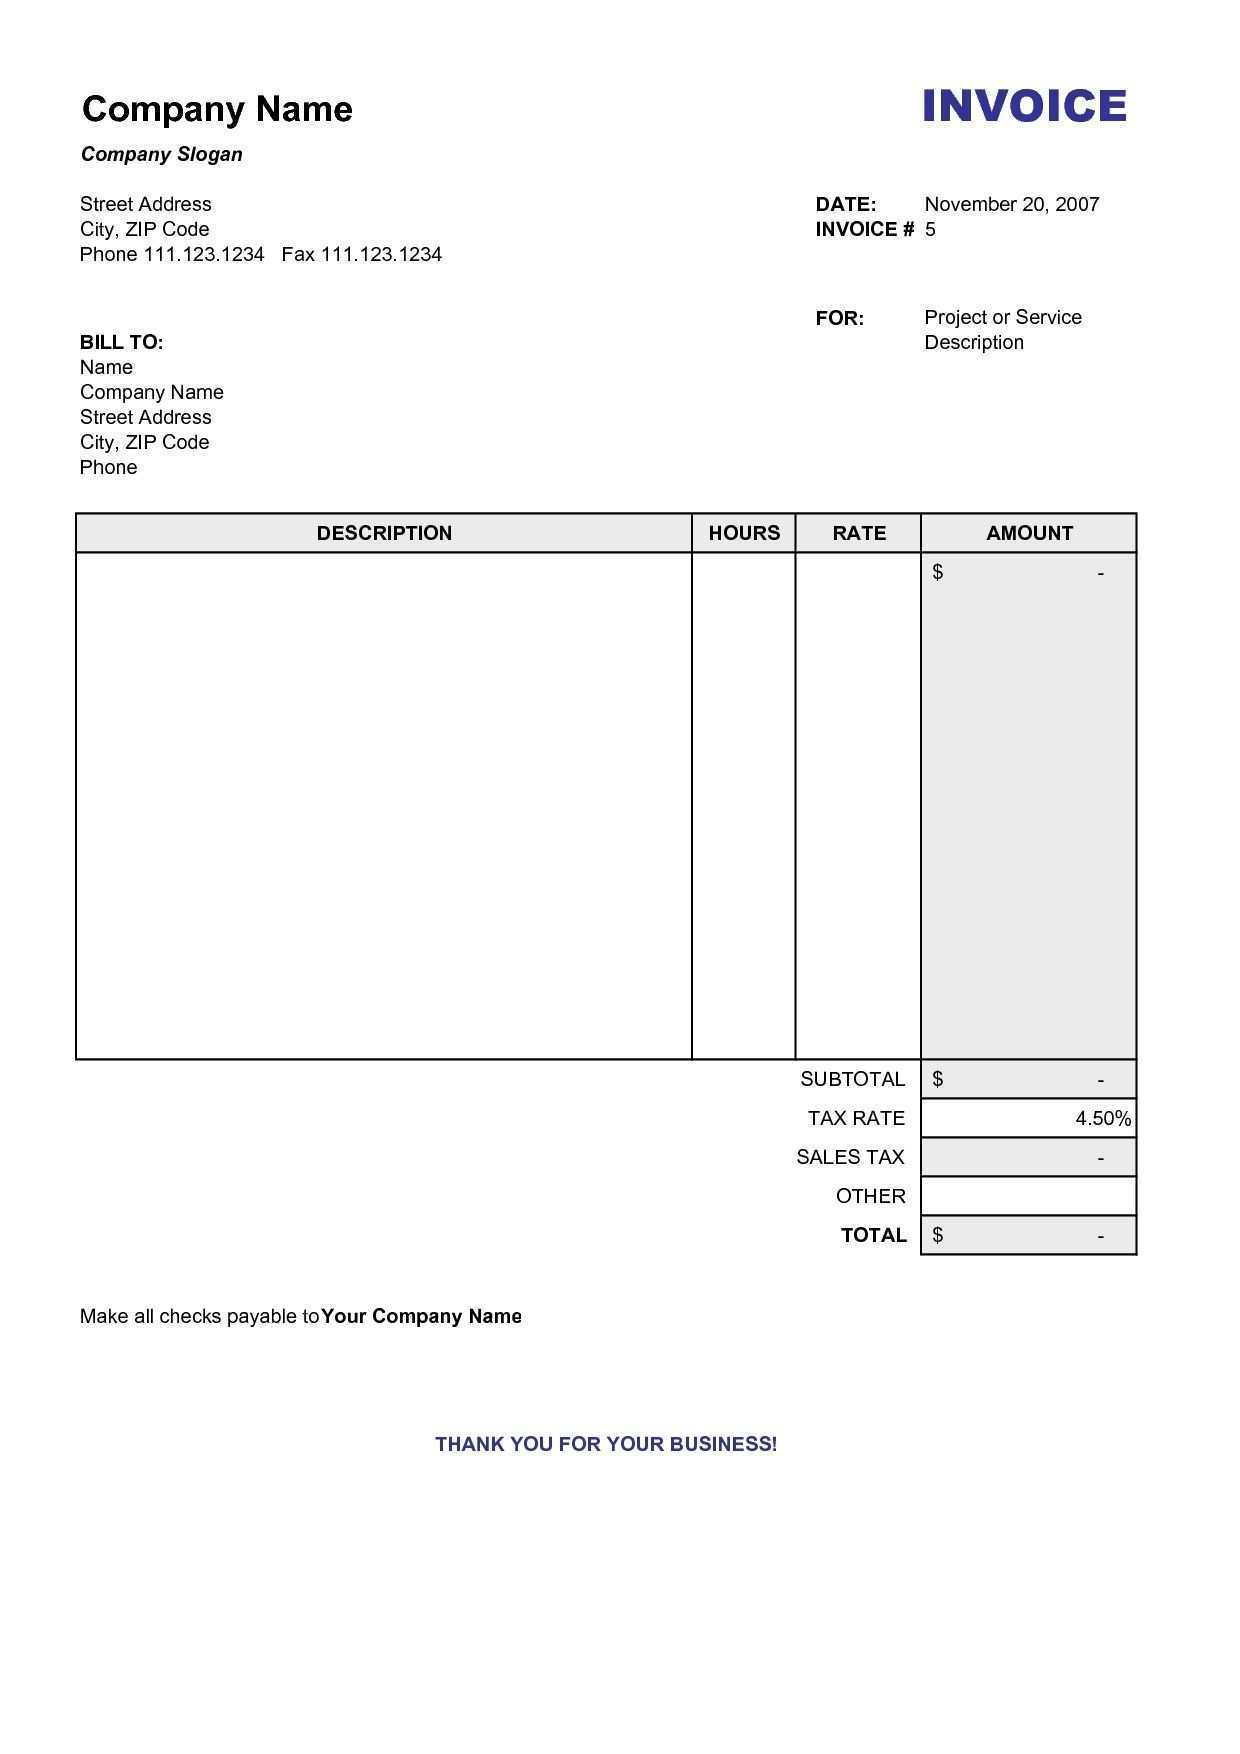 40 Format Australian Blank Invoice Template For Free By Australian Blank Invoice Template Cards Design Templates